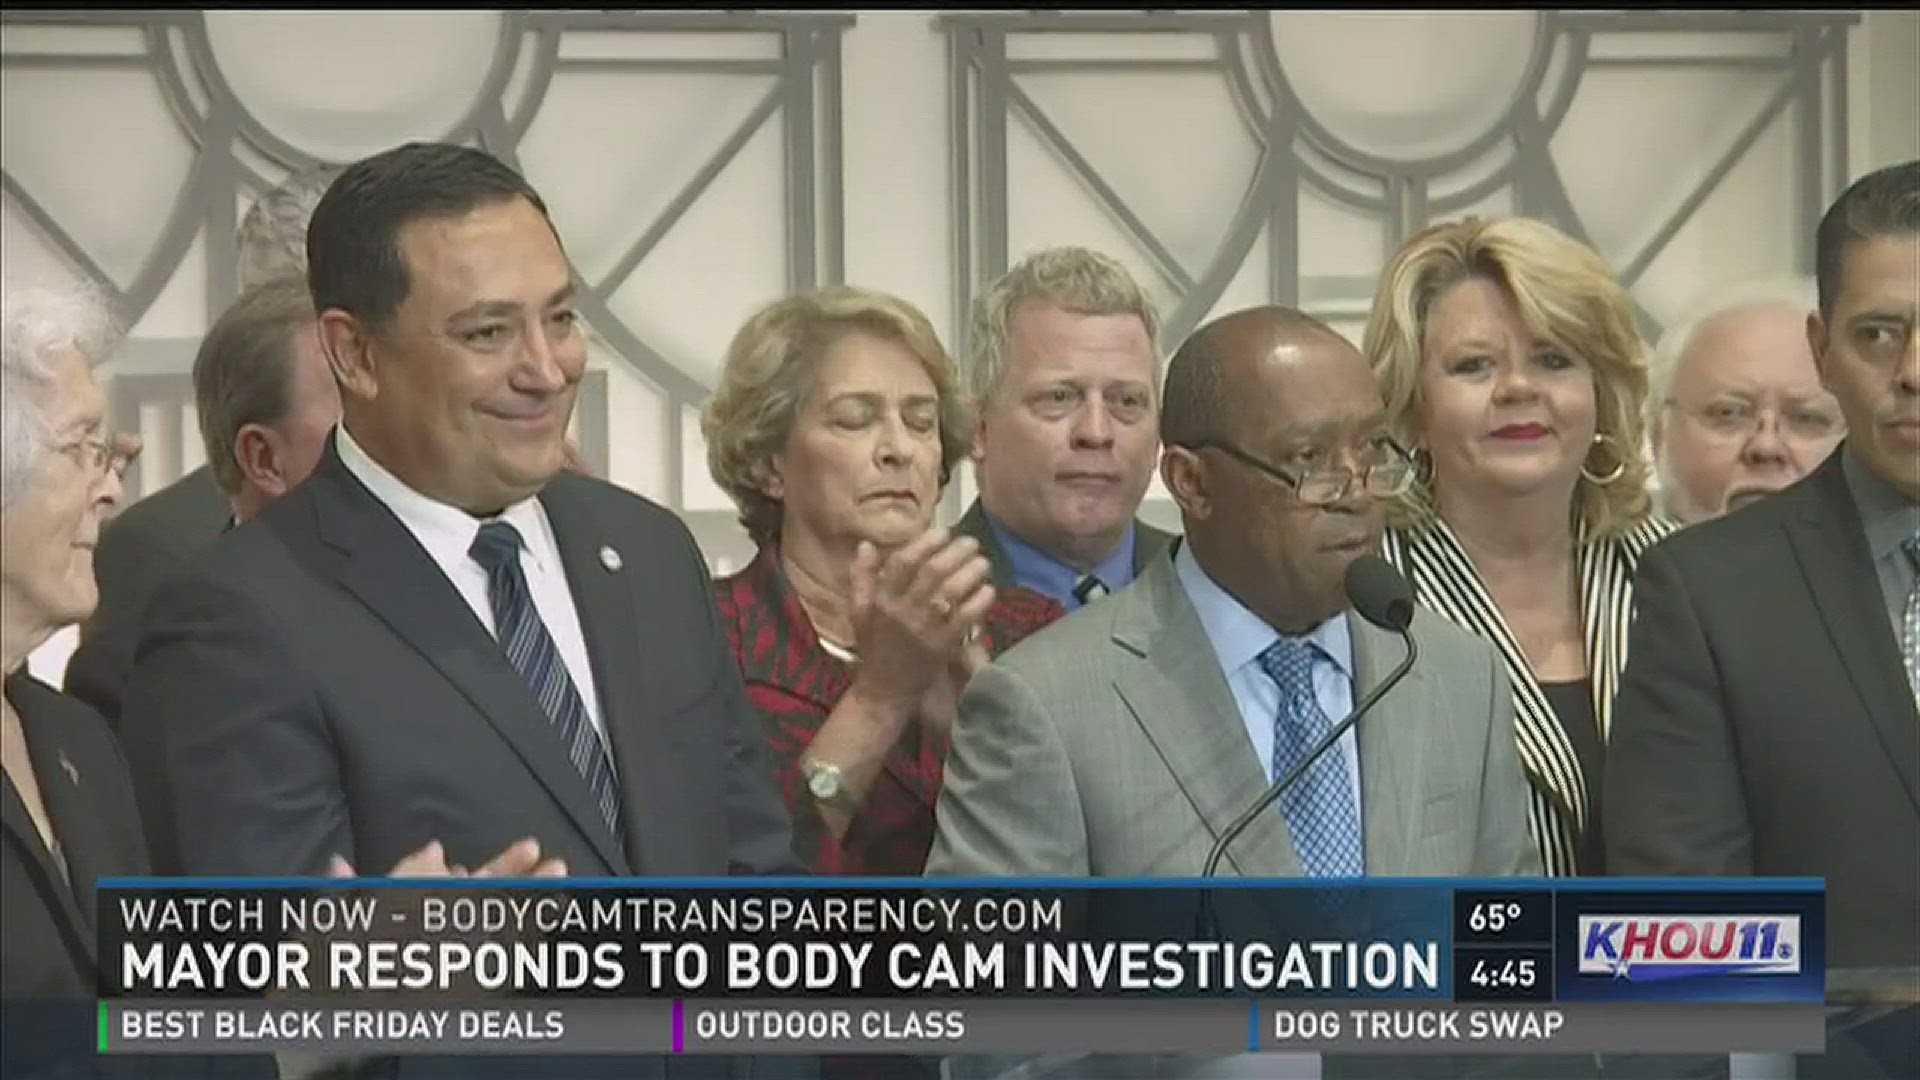 Sylvester Turner acknowledged there is work to be done with Houston's body-camera program.